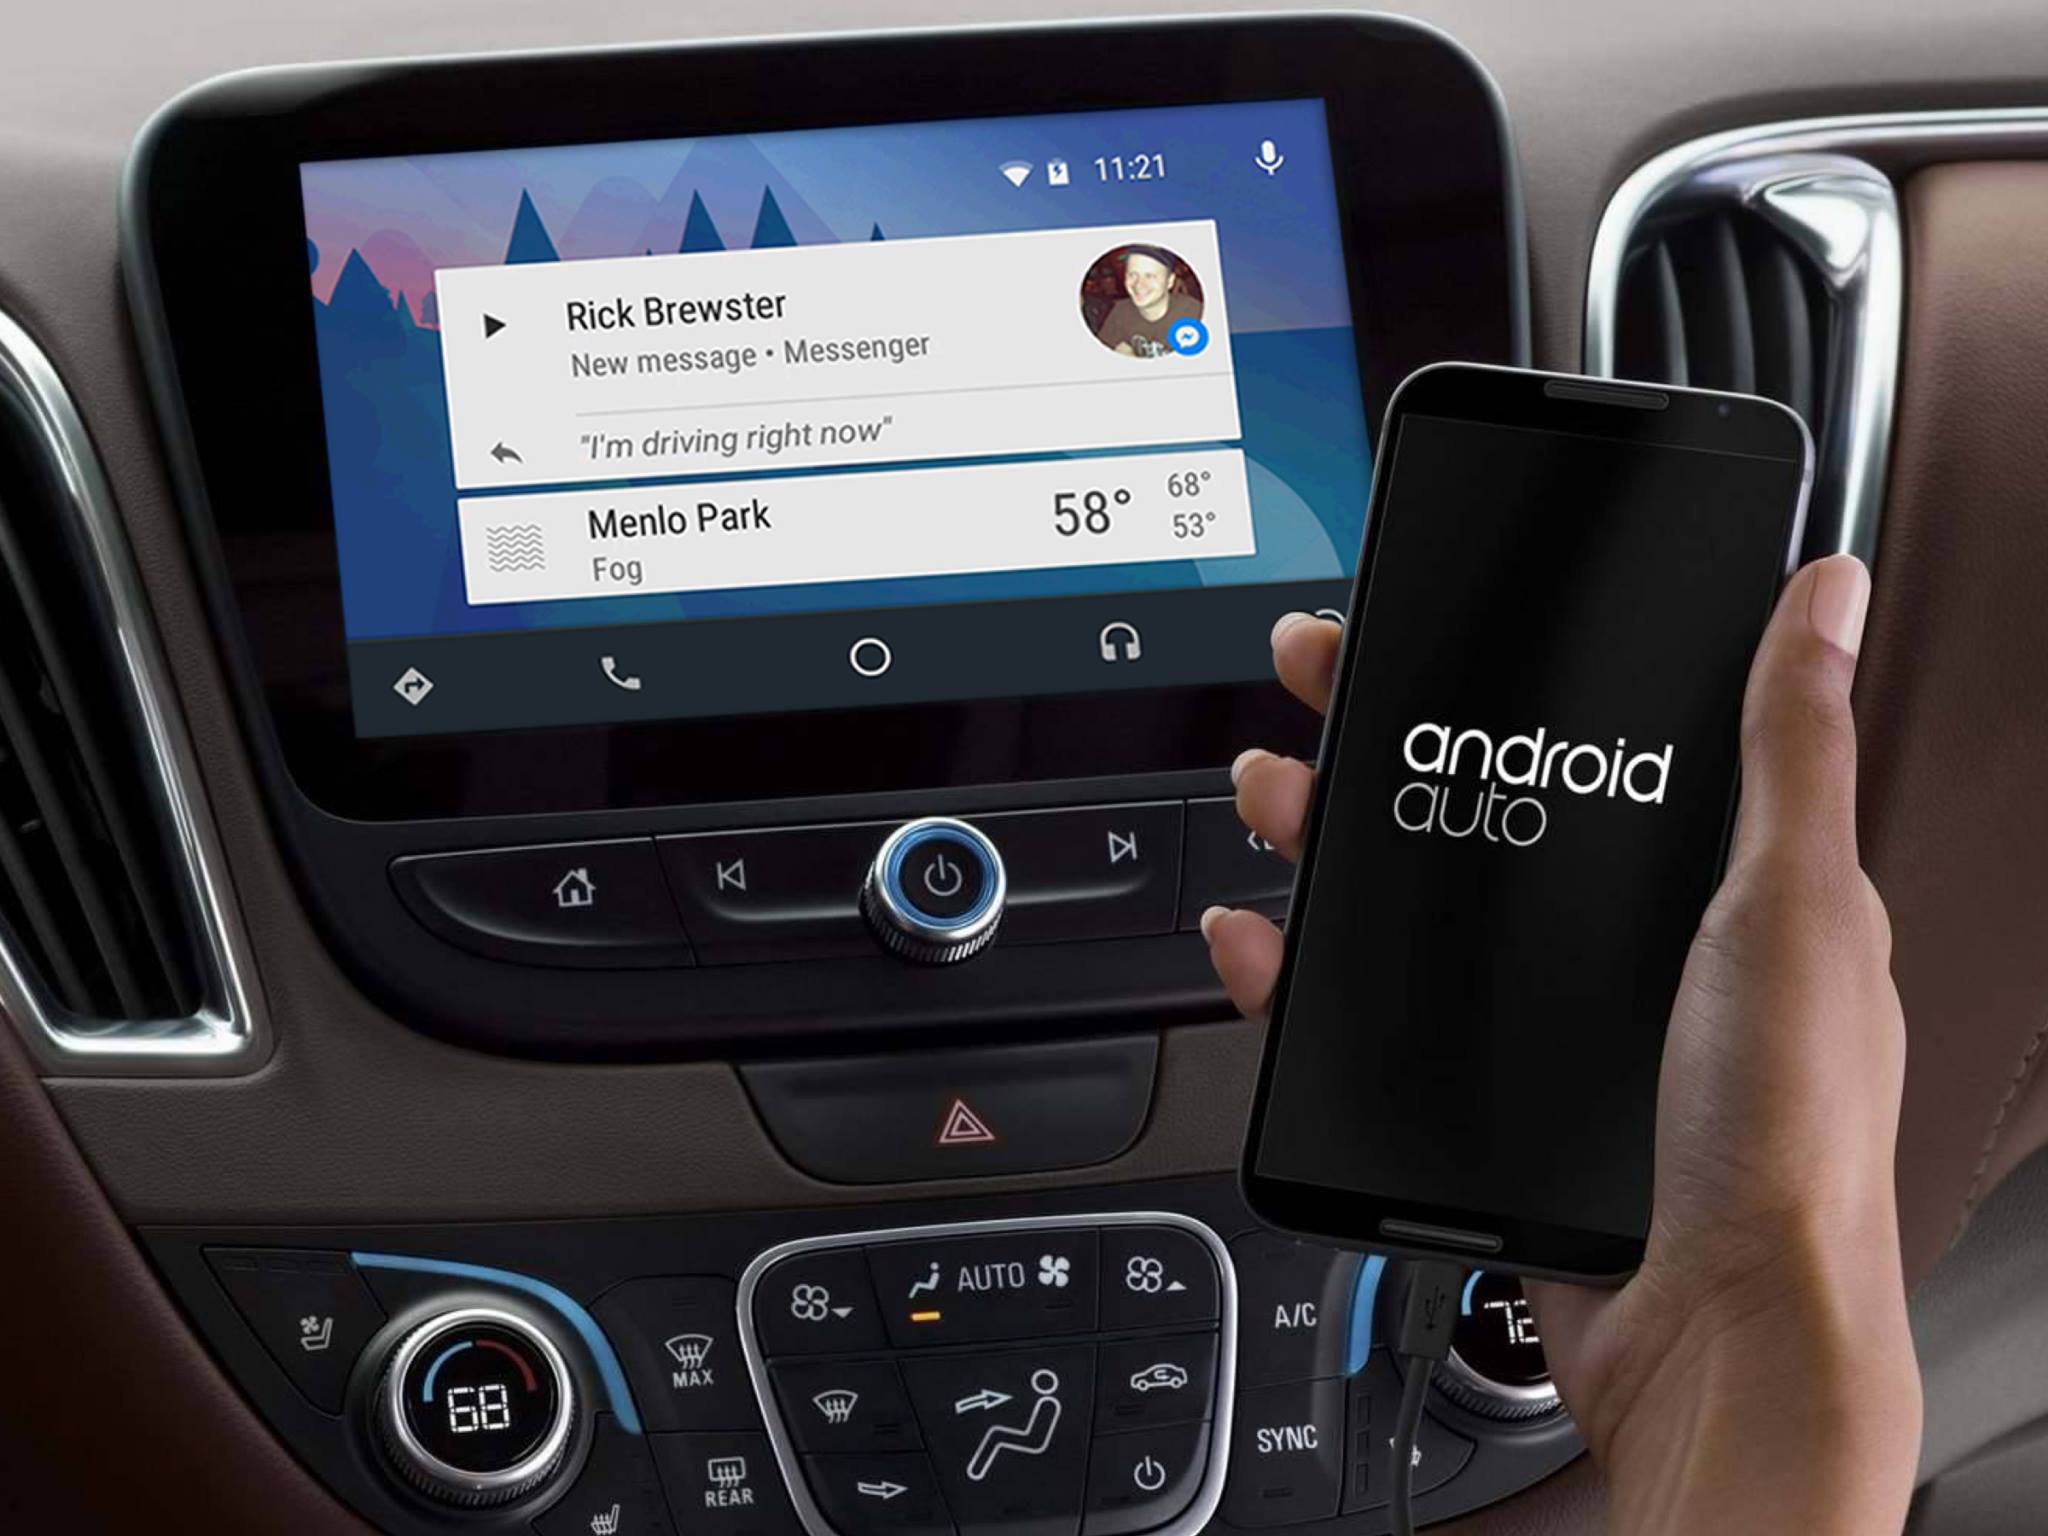 Facebook Messenger now works in Android Auto | TechCrunch